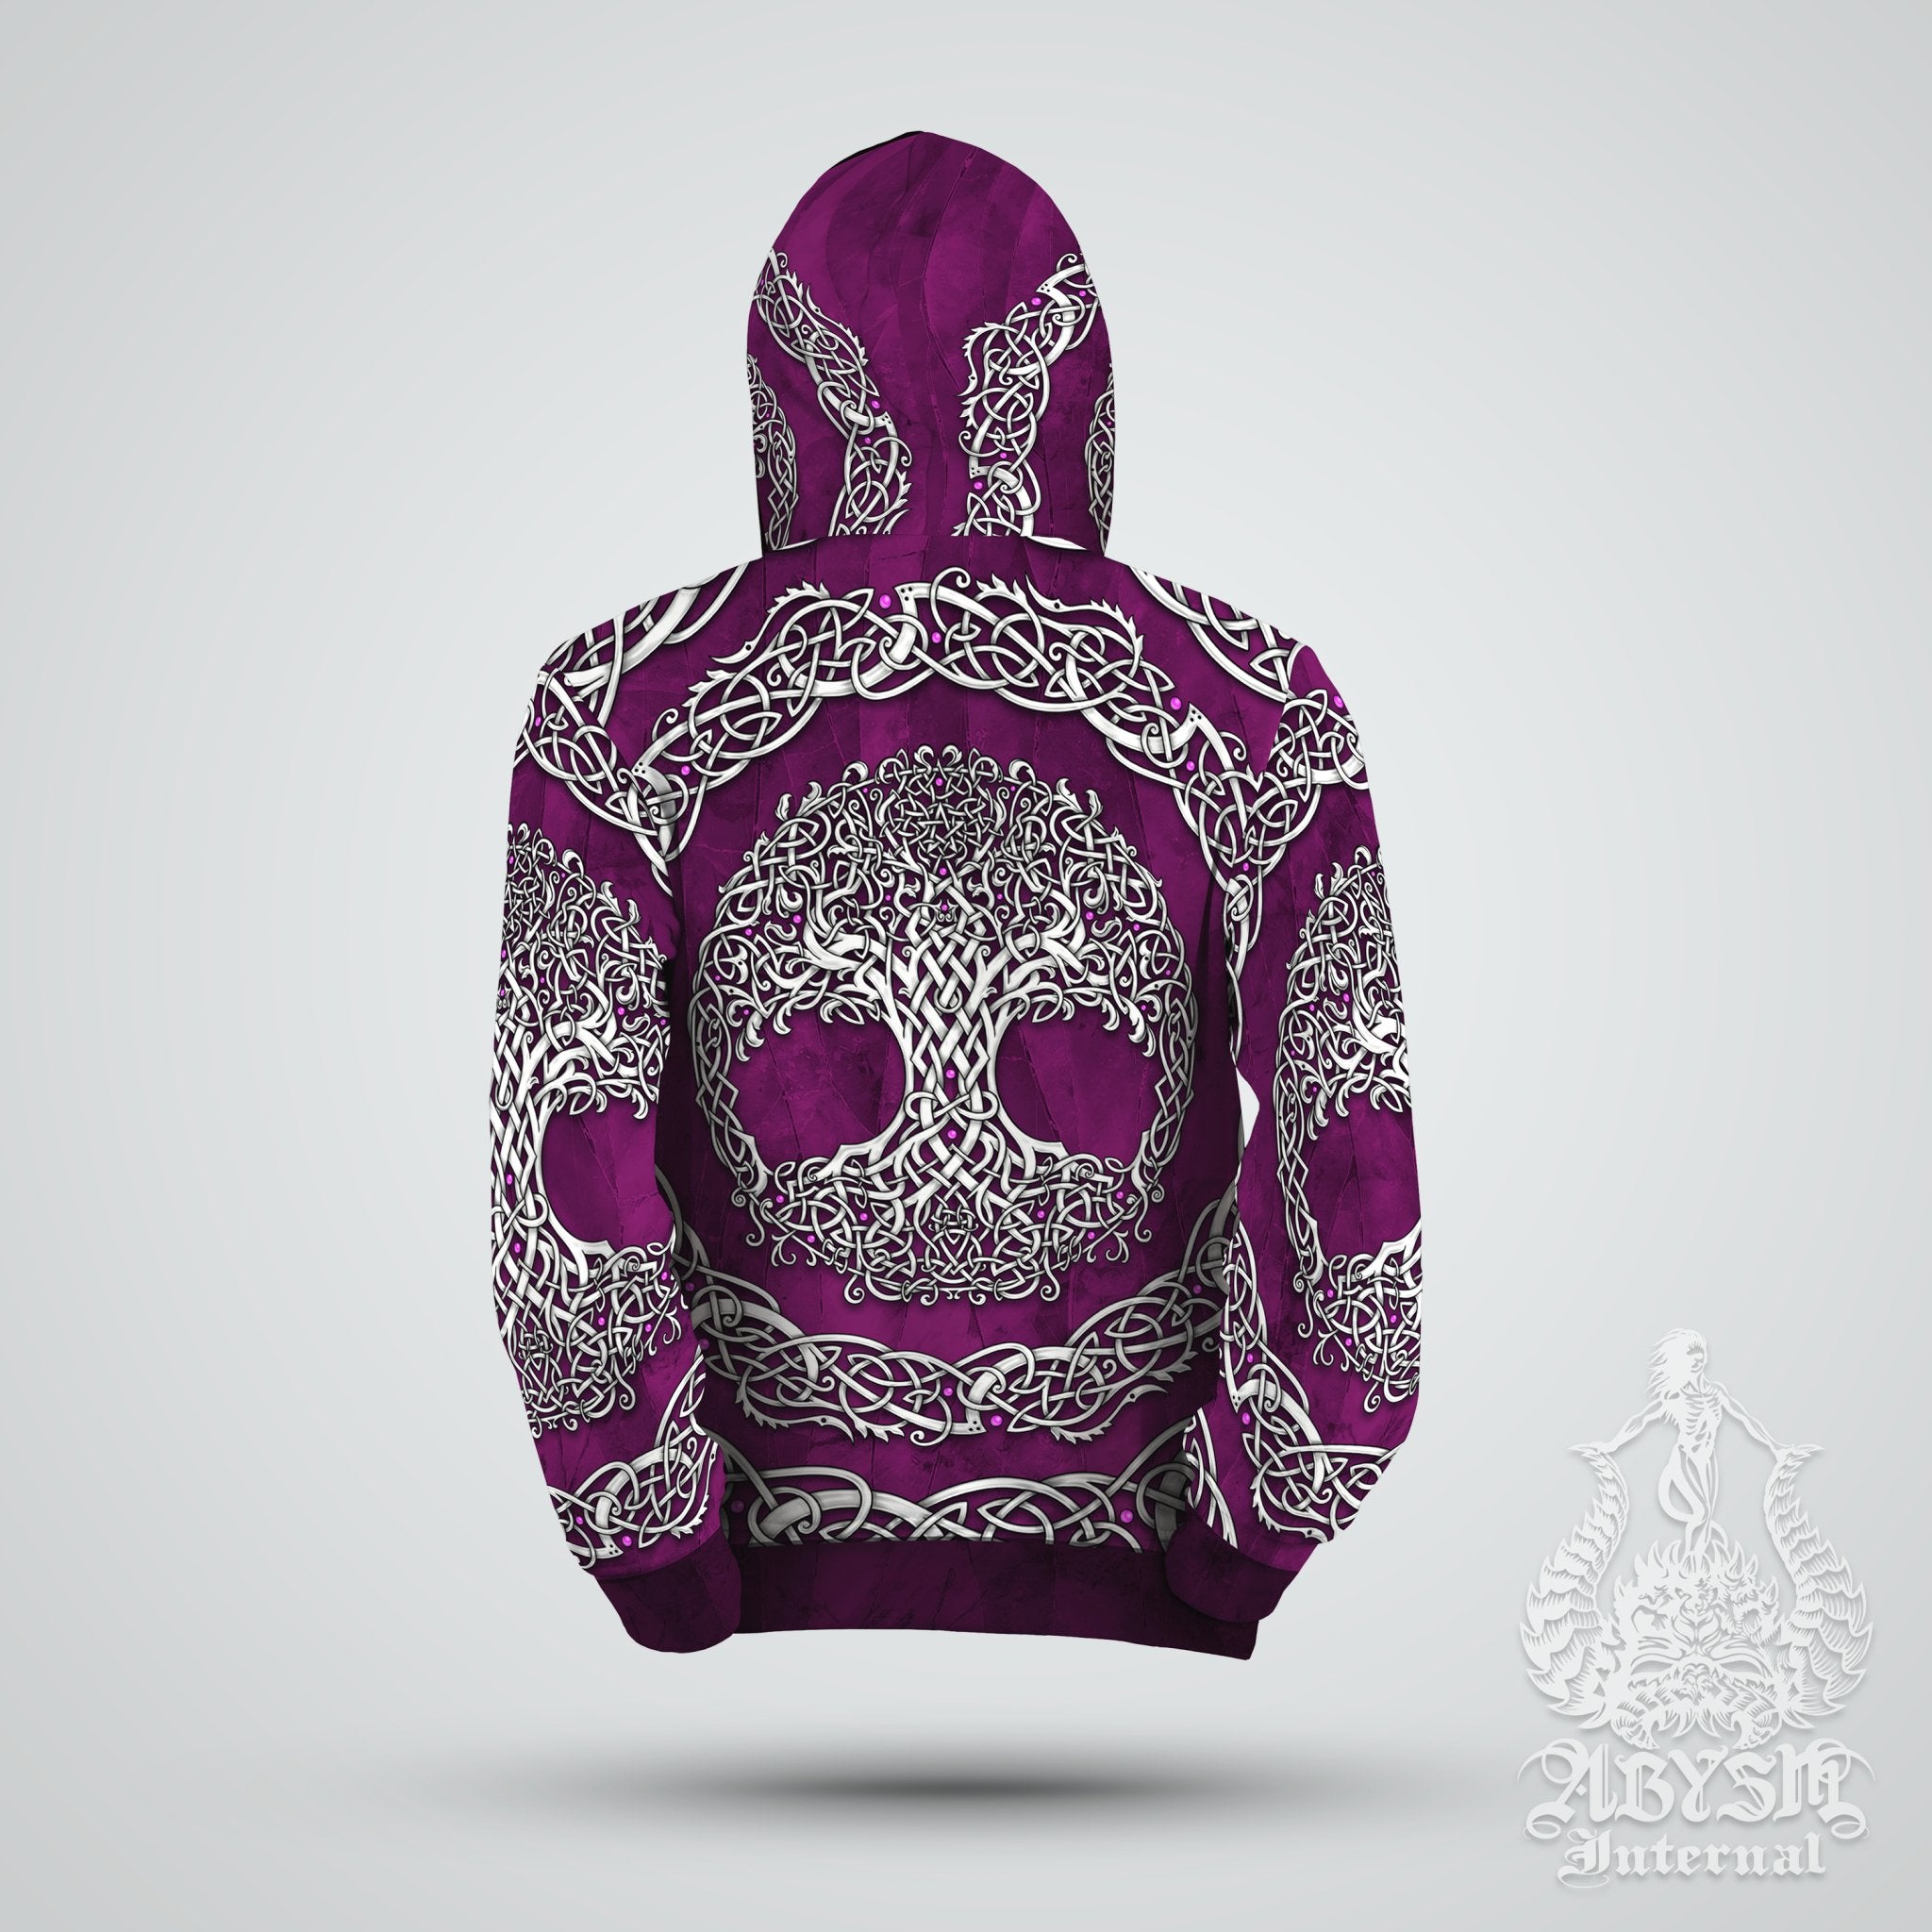 Celtic Hoodie, Nature Pullover, Indie Outfit, Boho Sweater, Tree of Life Streetwear, Witchy Clothing, Unisex - White and Green, Purple or Black, 3 Colors - Abysm Internal